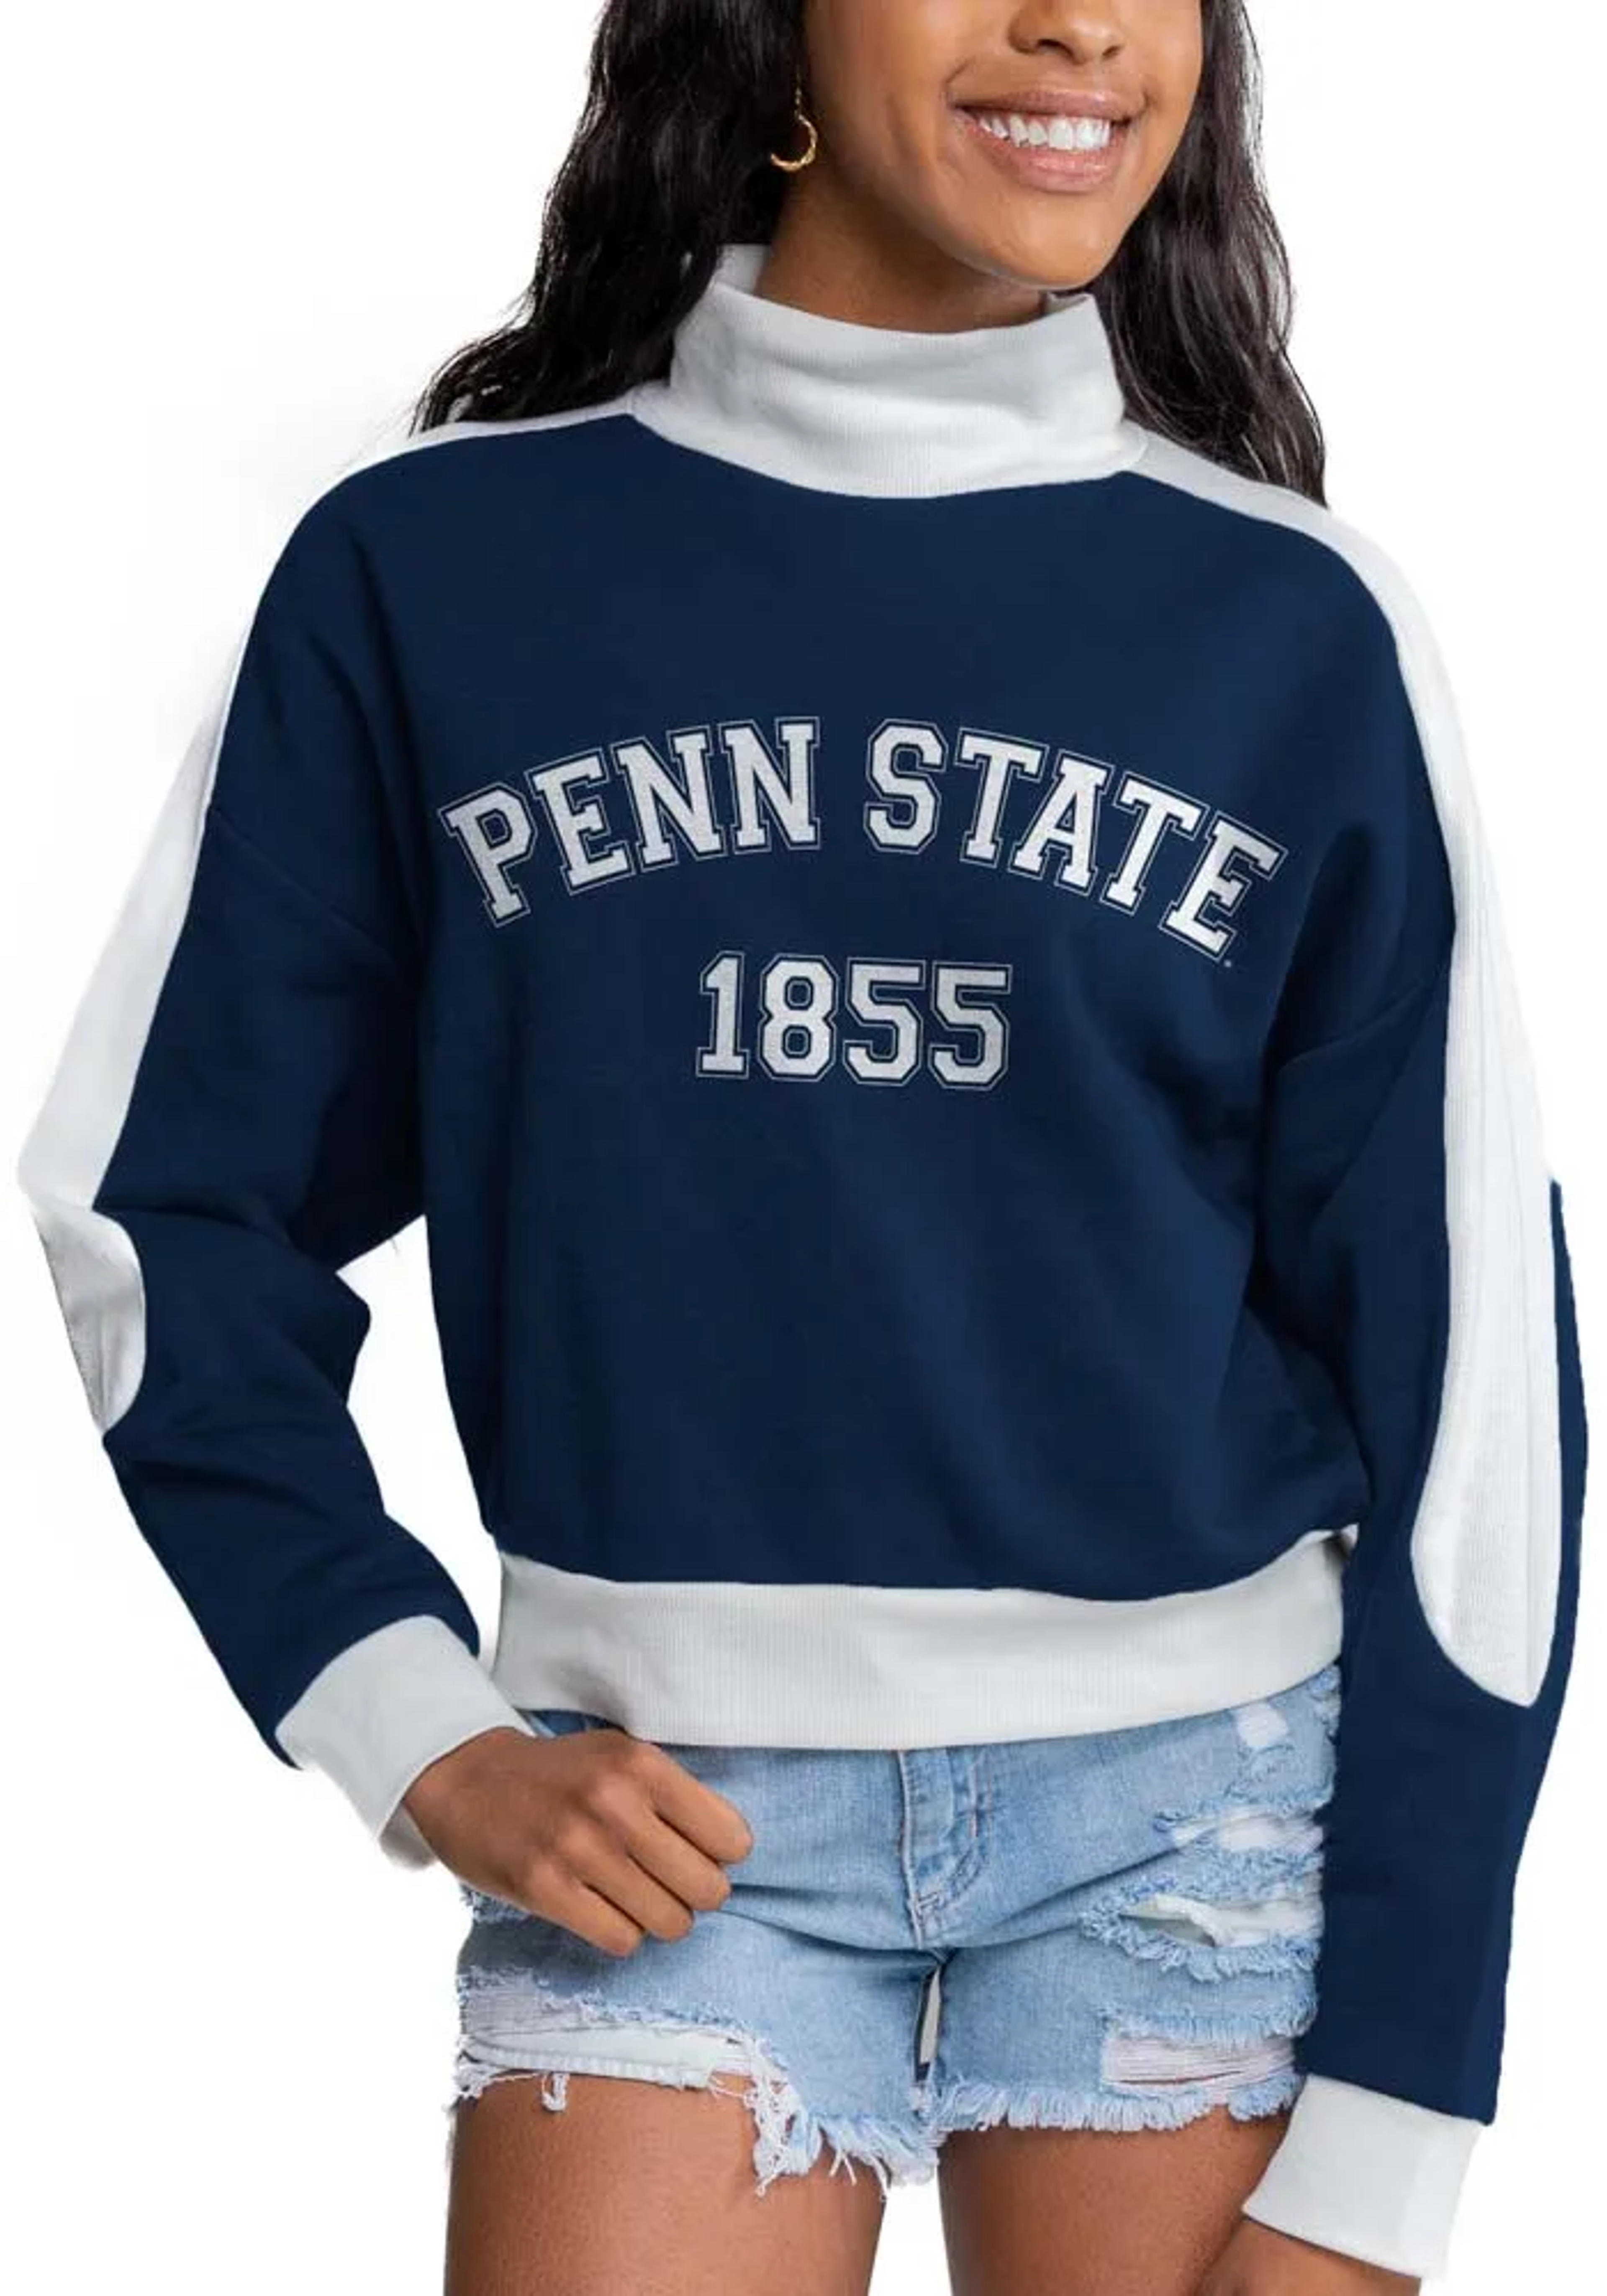 Penn State Nittany Lions Gameday Couture Crew Sweatshirt Womens Navy Blue Make It A Mock Long Sleeve